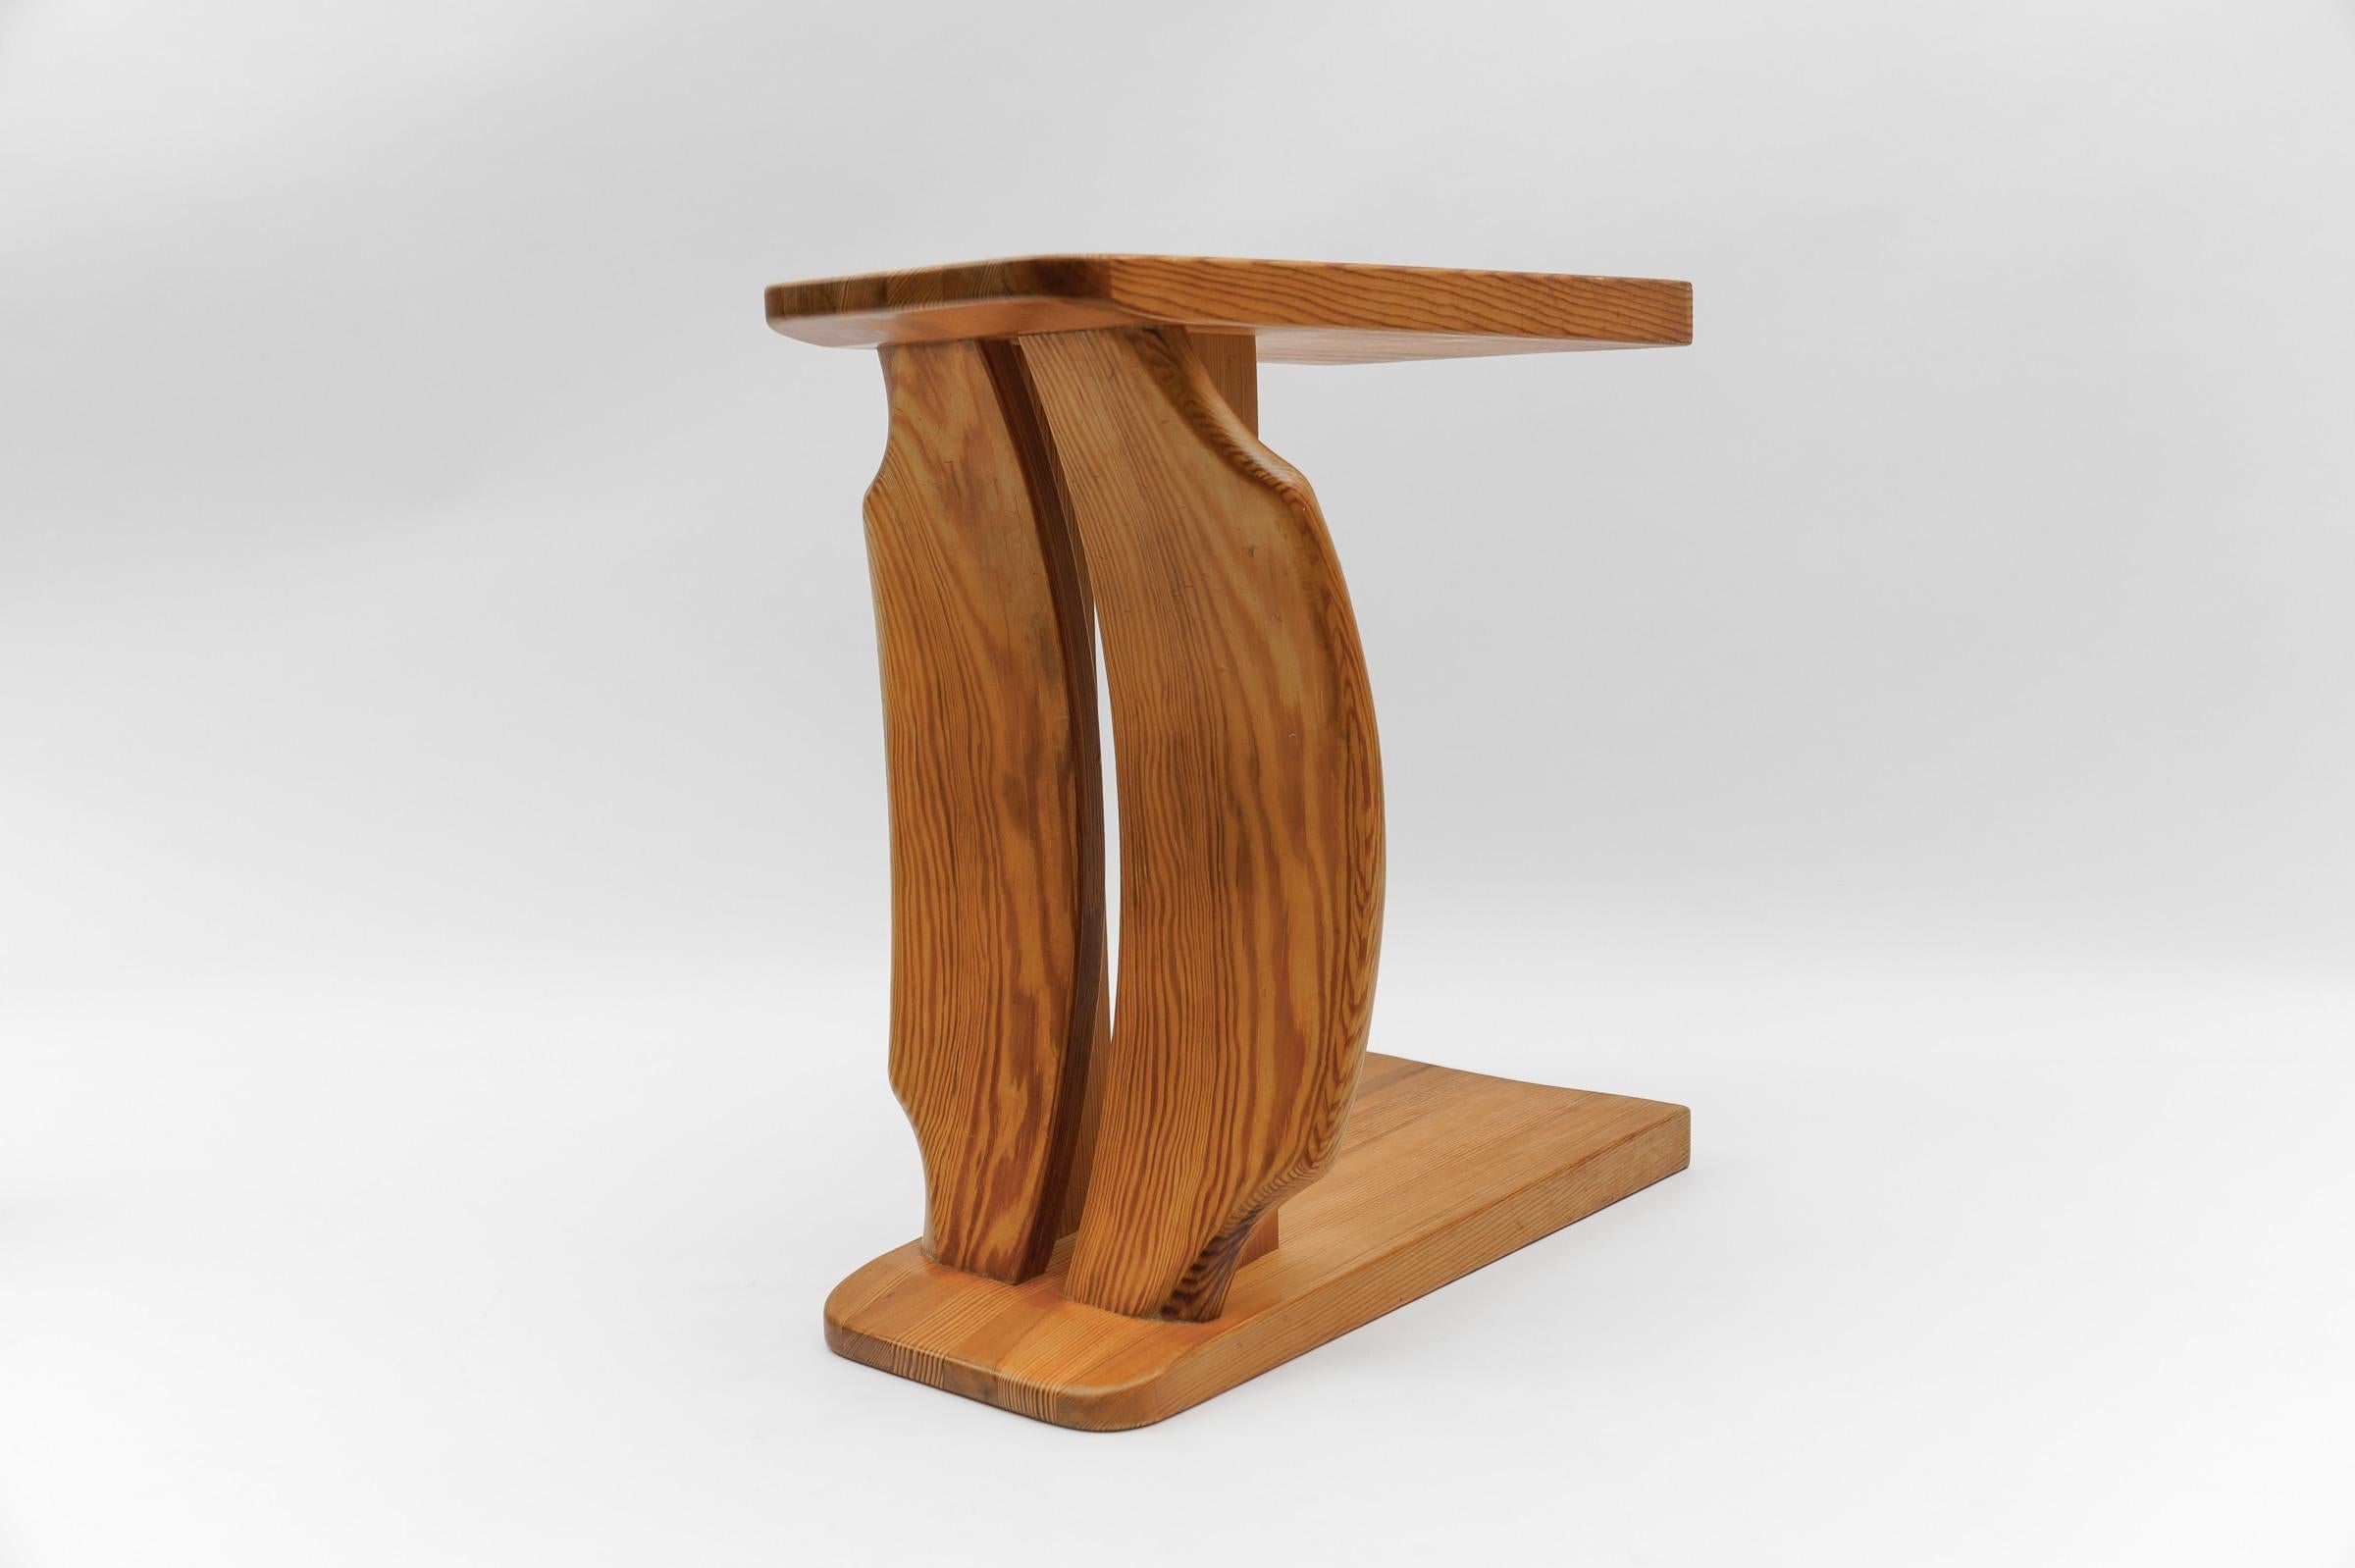 Late 20th Century Mid-Century Modern Pine Wood Stool by Gilbert Marklund for Furusnickarn AB For Sale